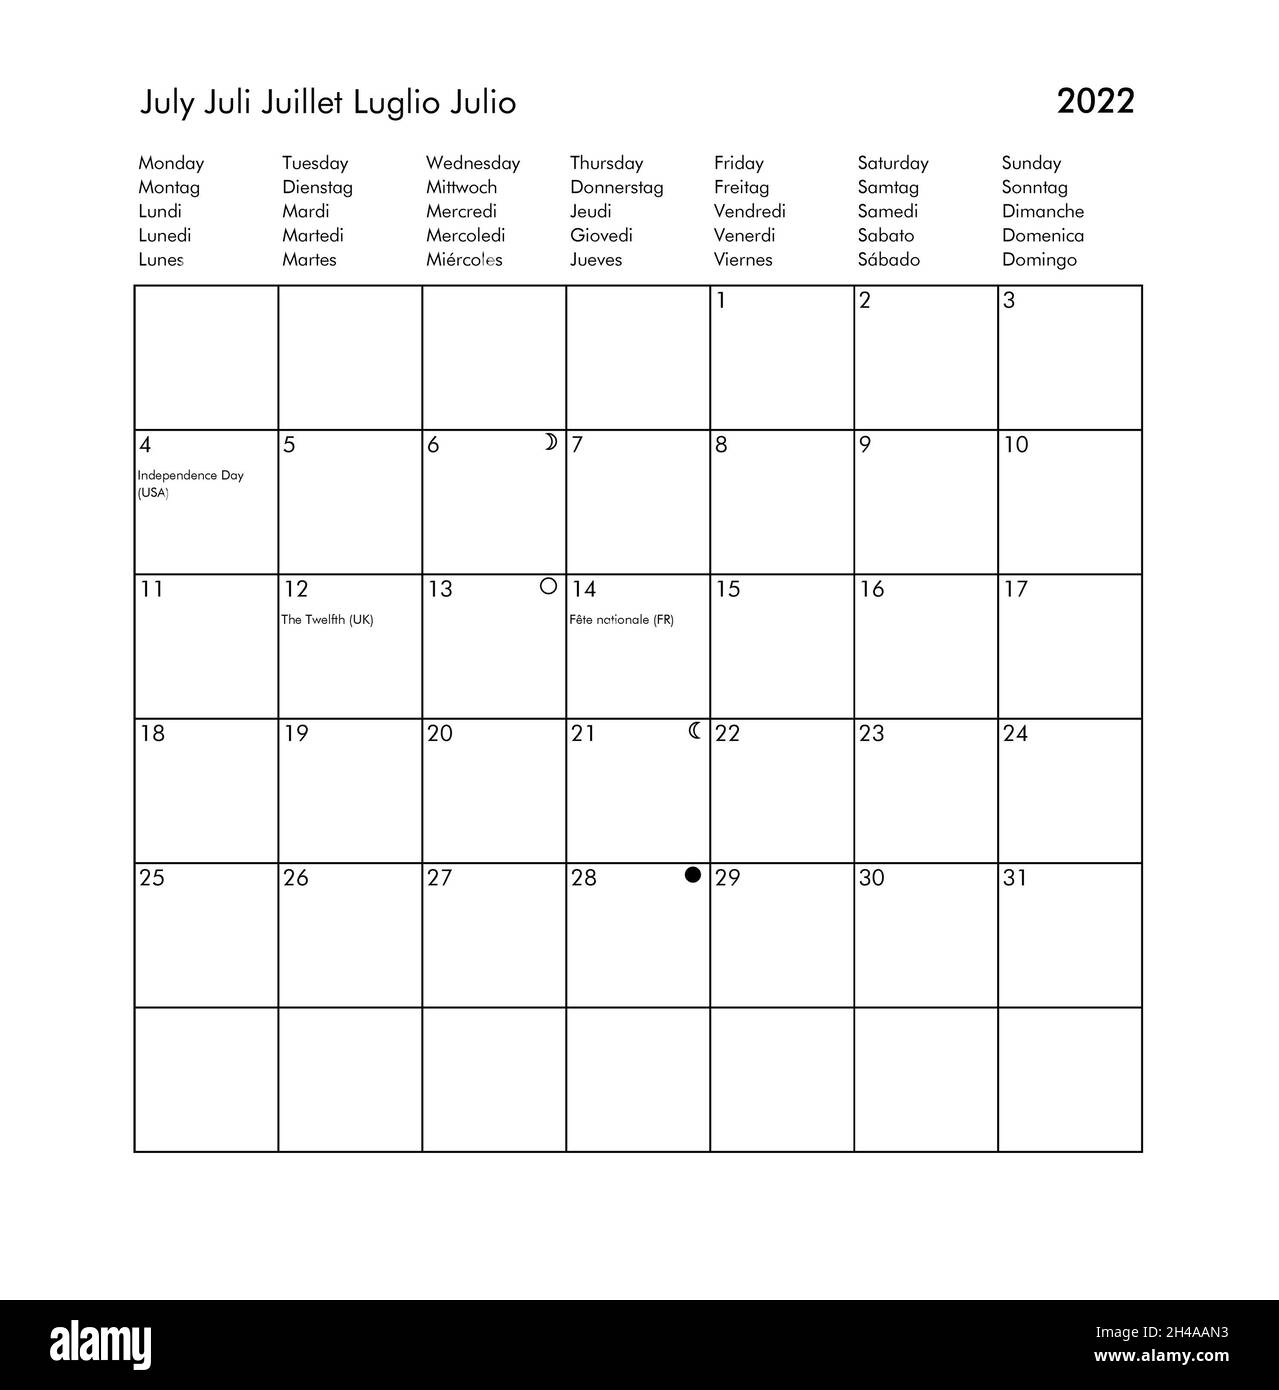 July International Calendar Of Year 2022 With Public Holidays And Bank Holidays For Uk Usa Germany France Italy Spain Stock Photo Alamy